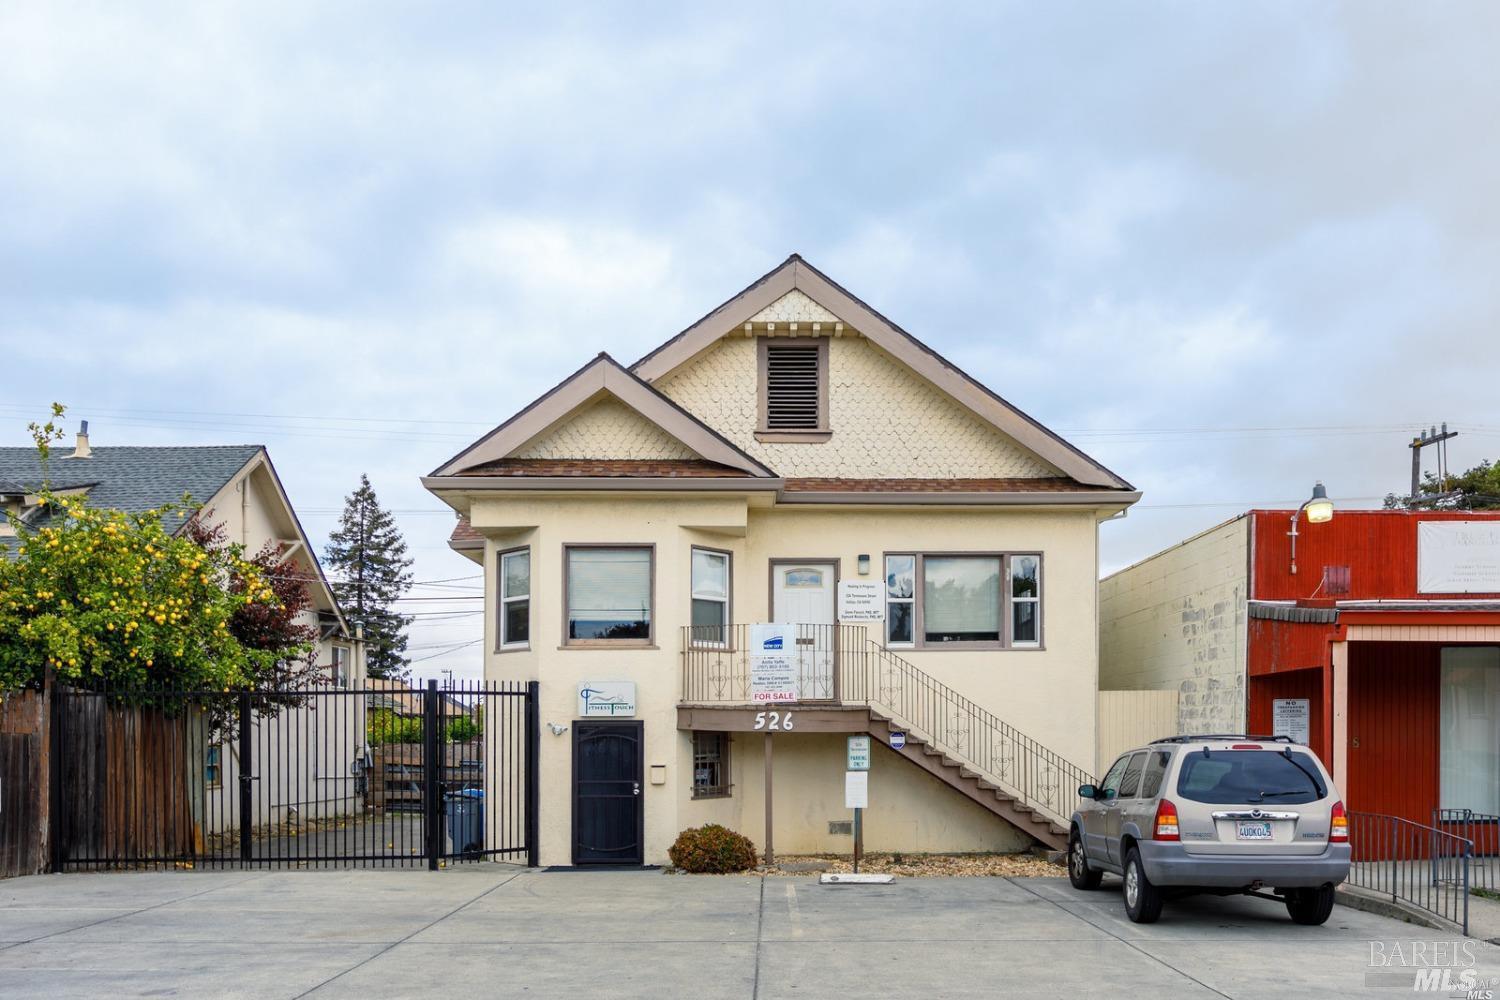 Photo of 526 Tennessee St in Vallejo, CA